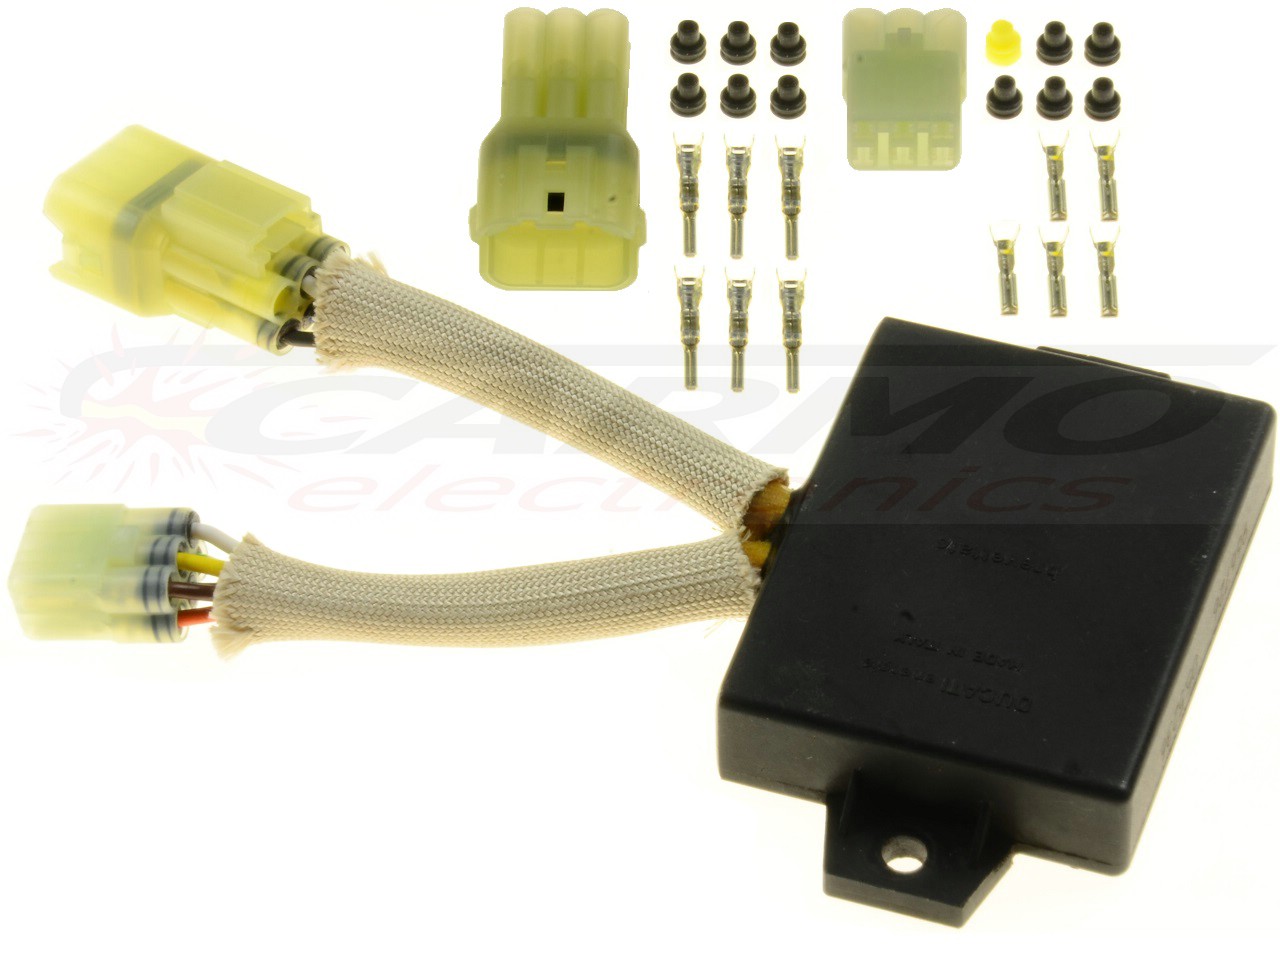 Rotax 912 966726 new wires, sleeves and connectors - Click Image to Close